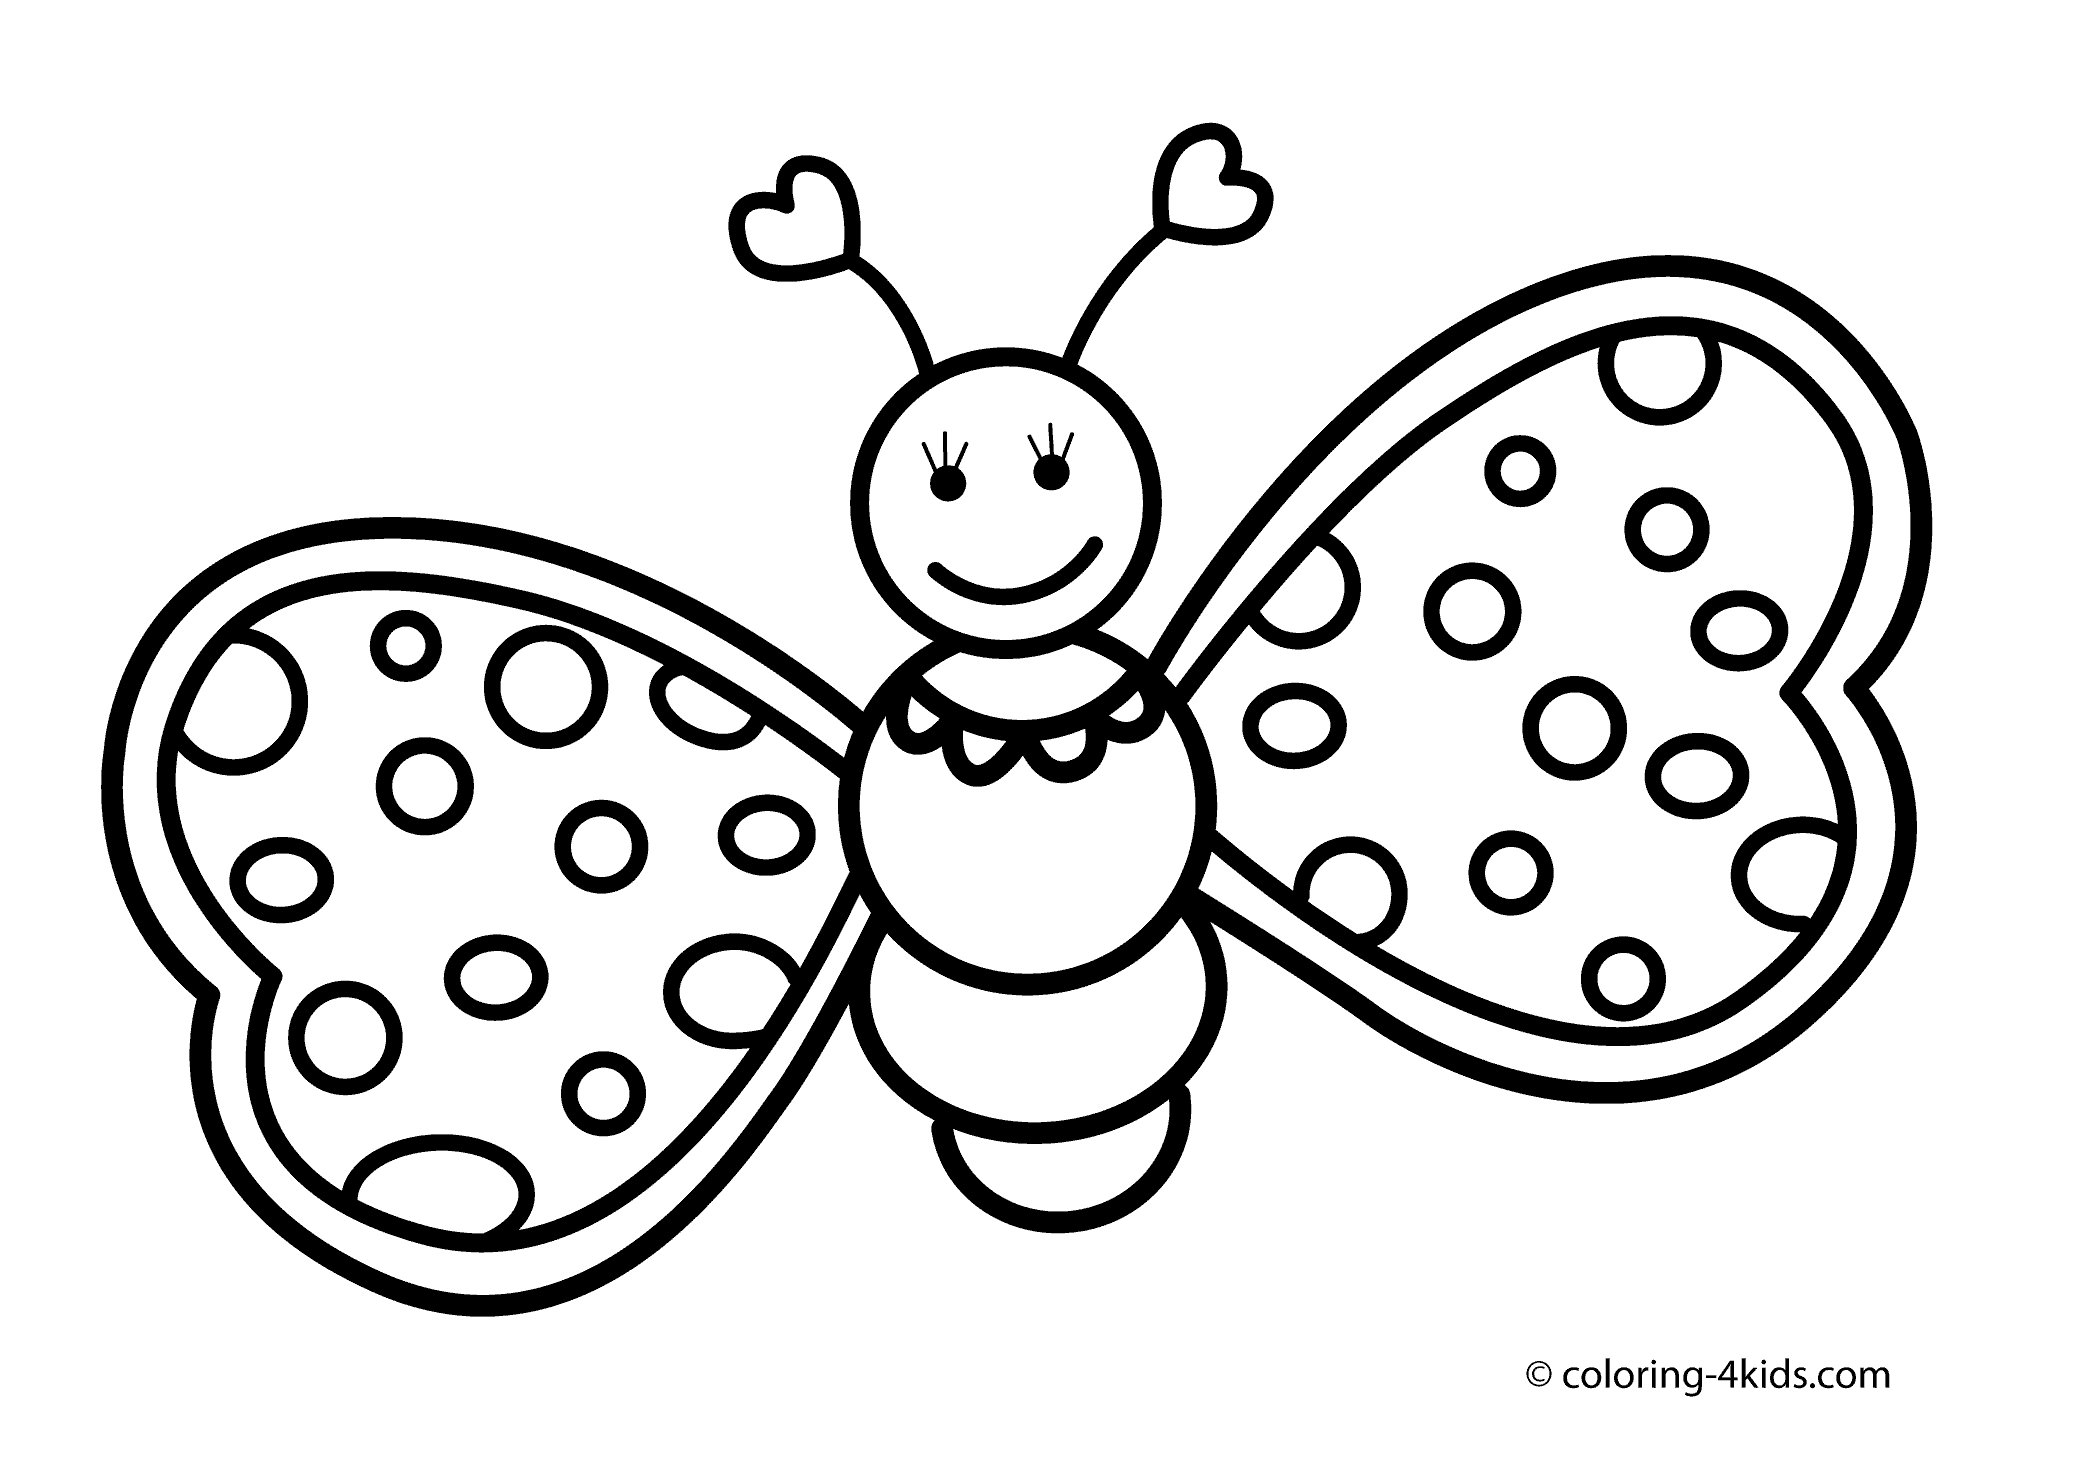 Butterfly Coloring Pages For Toddlers - Coloring Pages For All Ages